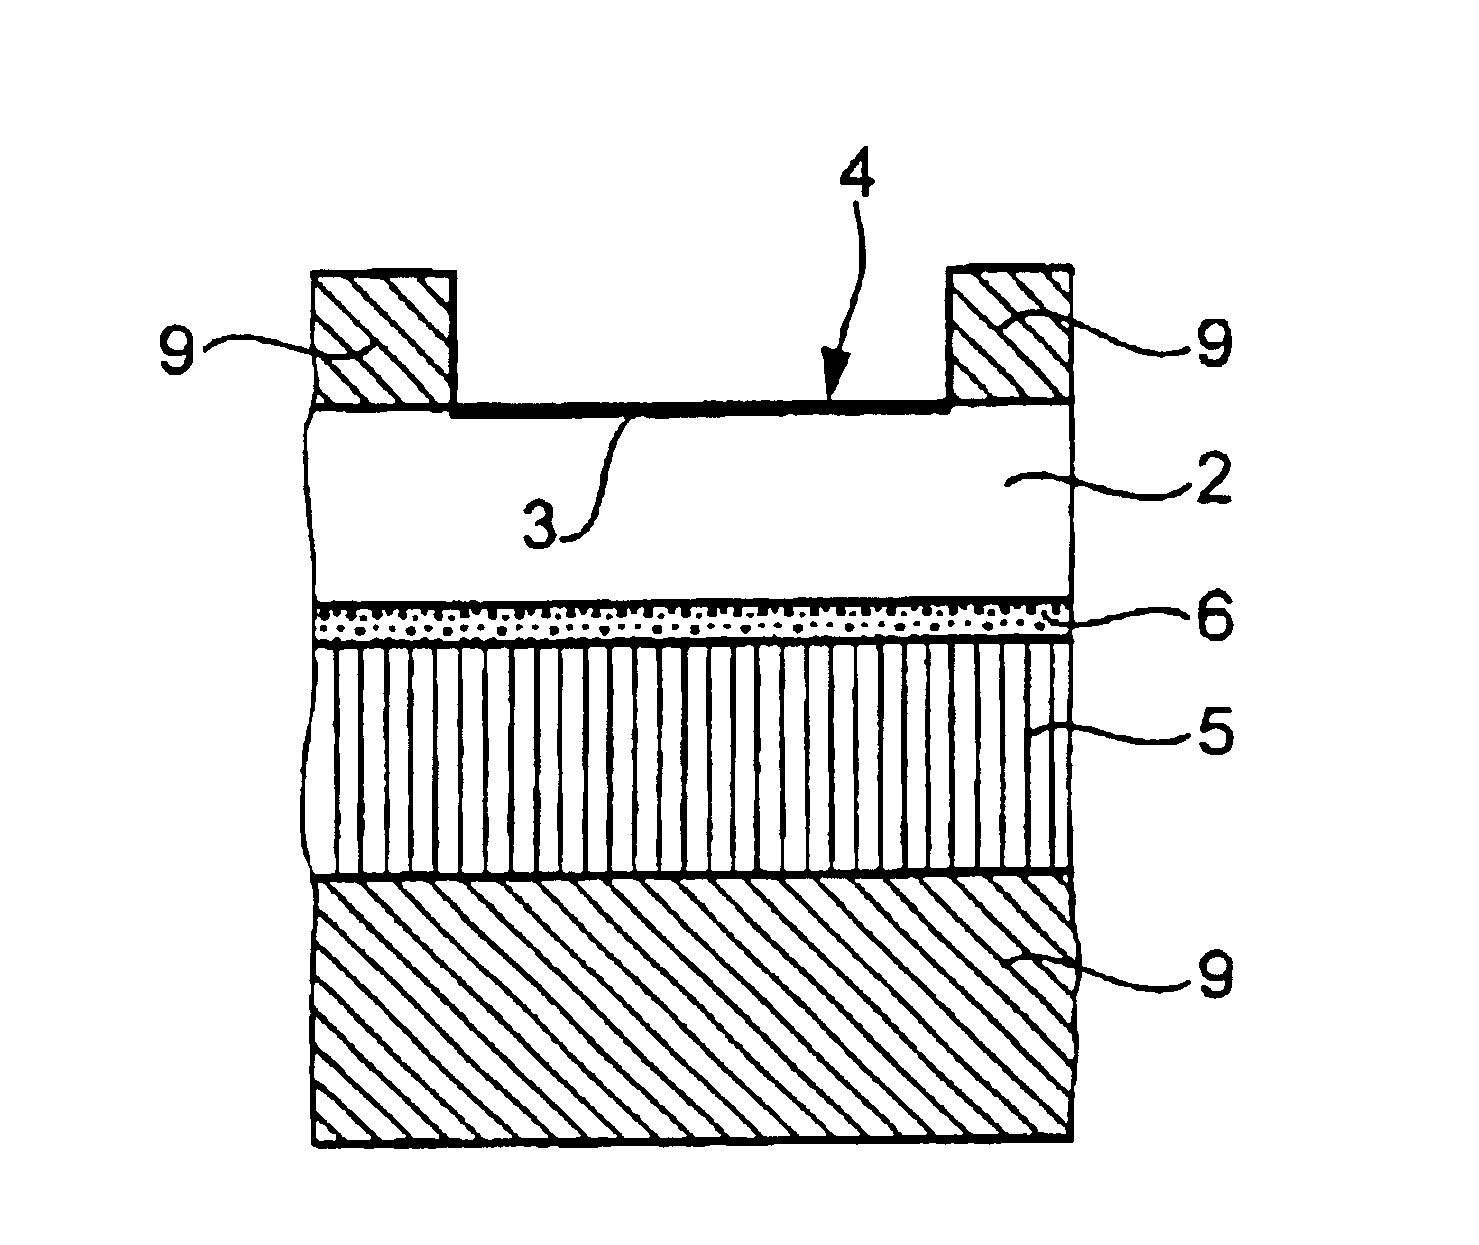 Method and production of a sensor